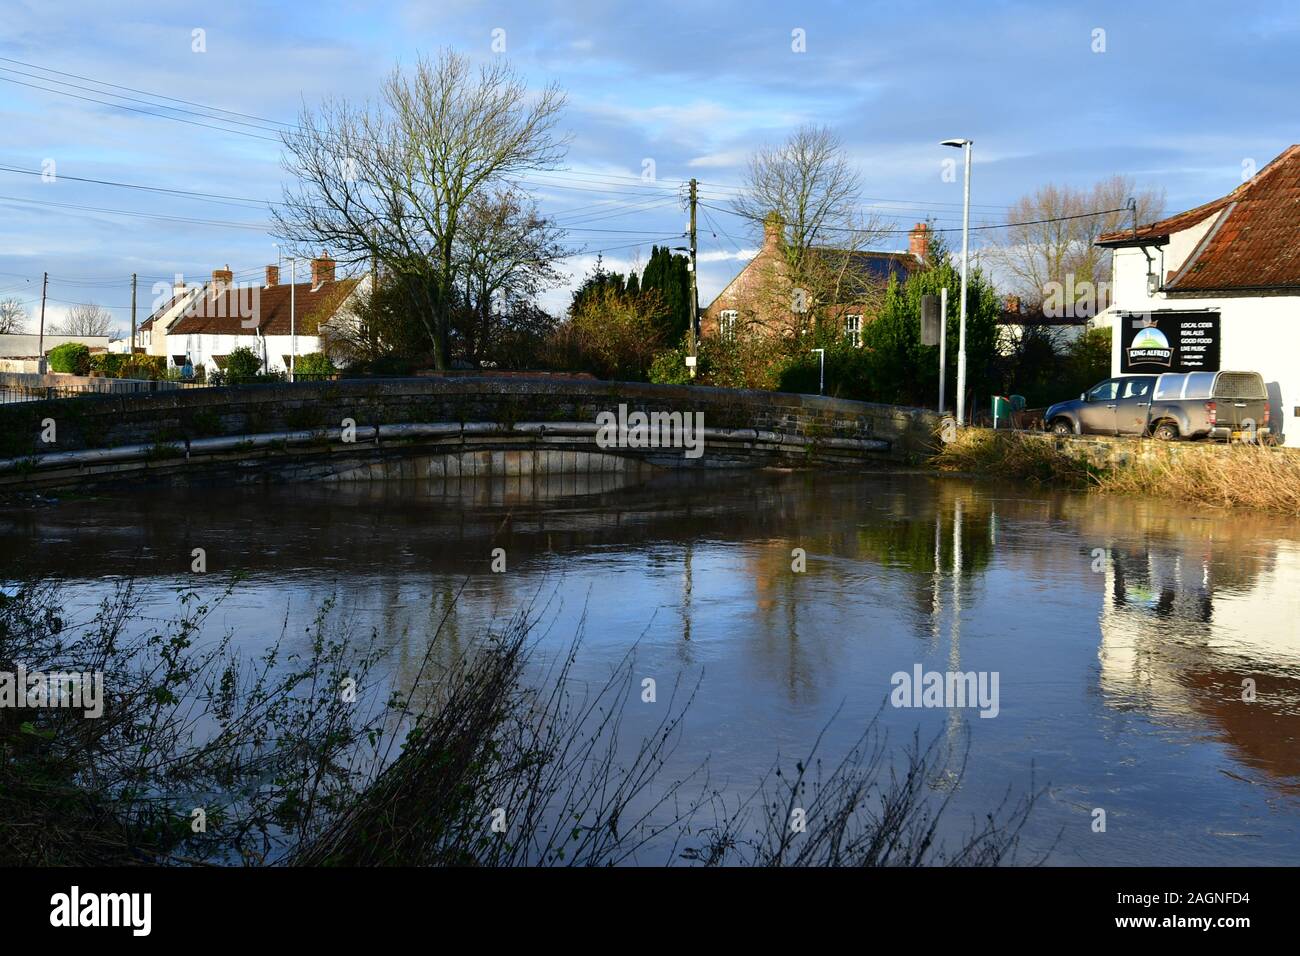 Burrowbridge, Somerset. 20th Dec 2019. UK Weather. Burrowbridge in Somerset seen with water levels very high during heavy flooding in surrounding areas. Picture Credit Robert Timoney/Alamy/Live/News Stock Photo